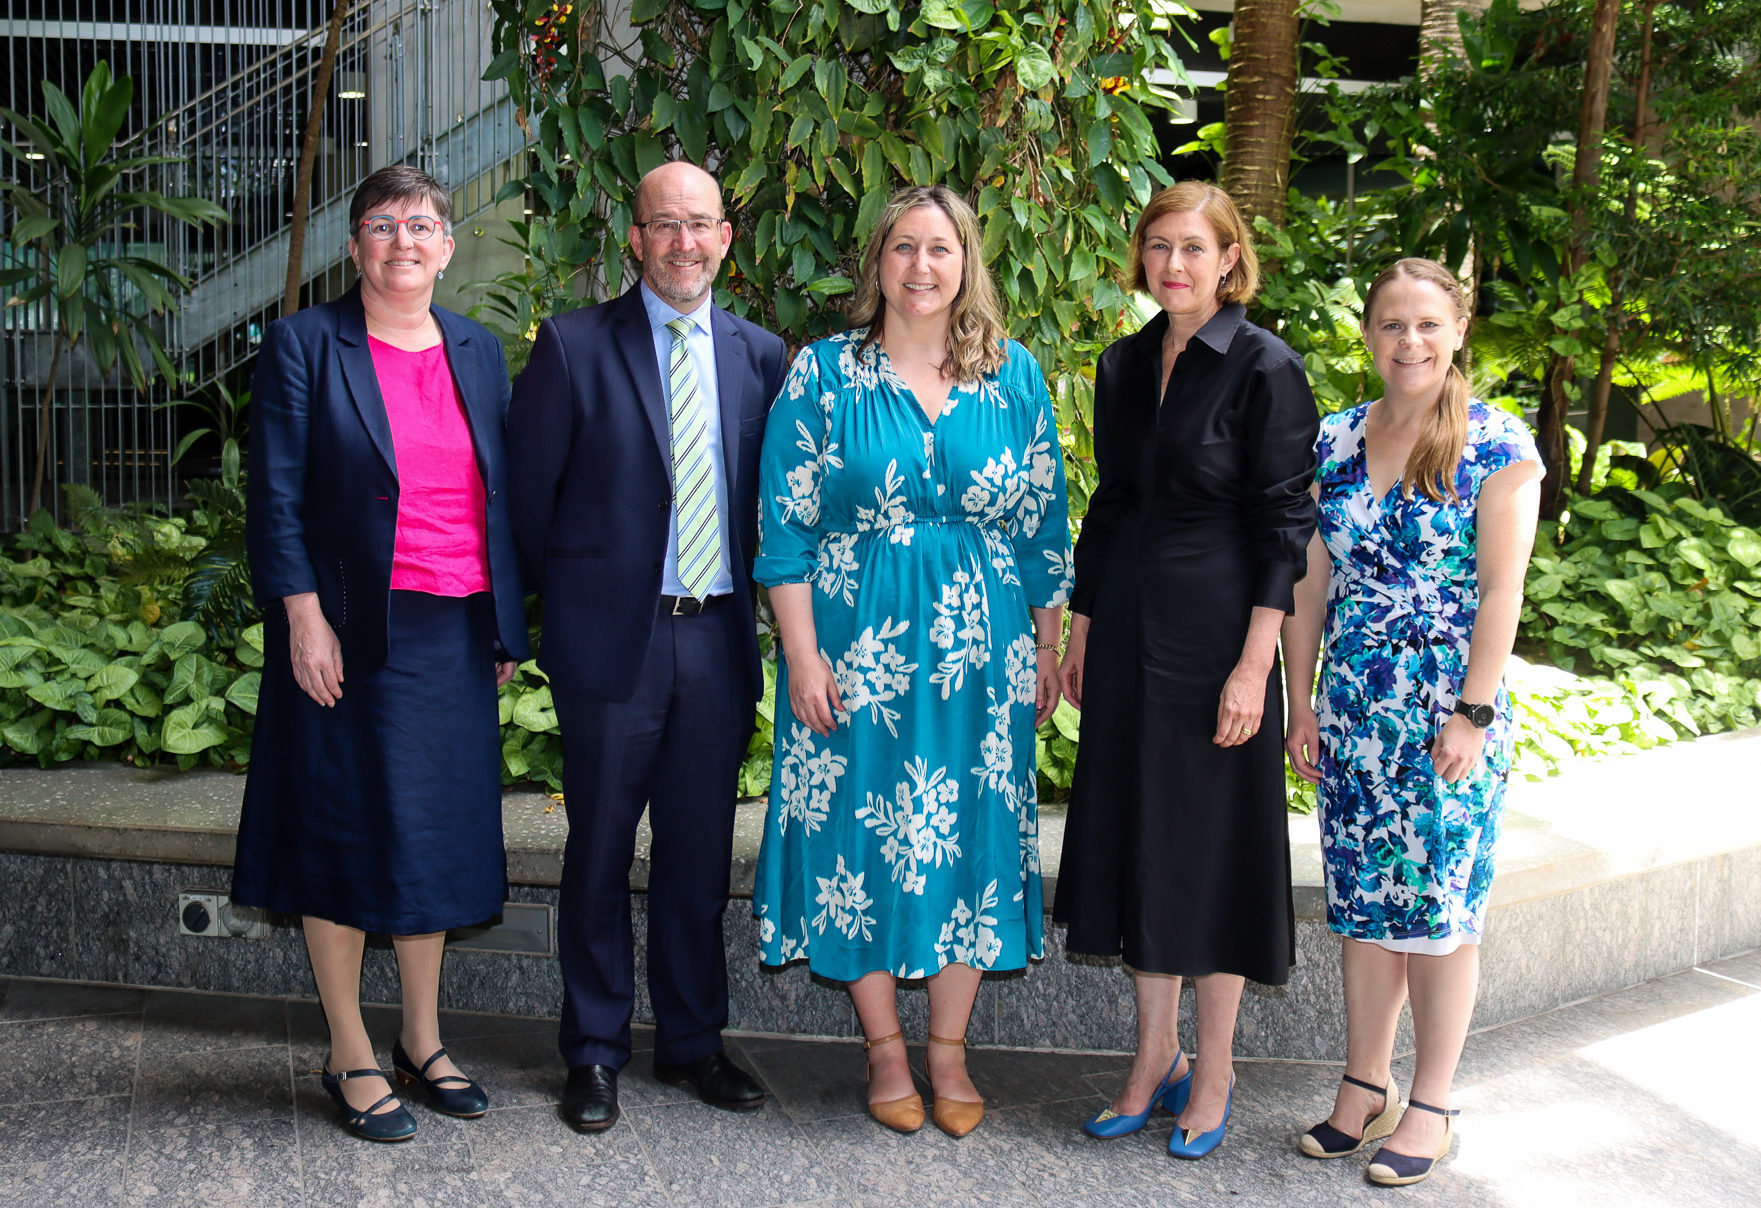 Pictured, from left: NHMRC acting CEO Clare McLaughlin; Wesley Research Institute CEO Andrew Barron; Emma McBride, Assistant Minister for Mental Health and Suicide Prevention, Assistant Minister for Rural and Regional Health; Dr Zephanie Tyack, QUT; Dr Bridget Abell, QUT